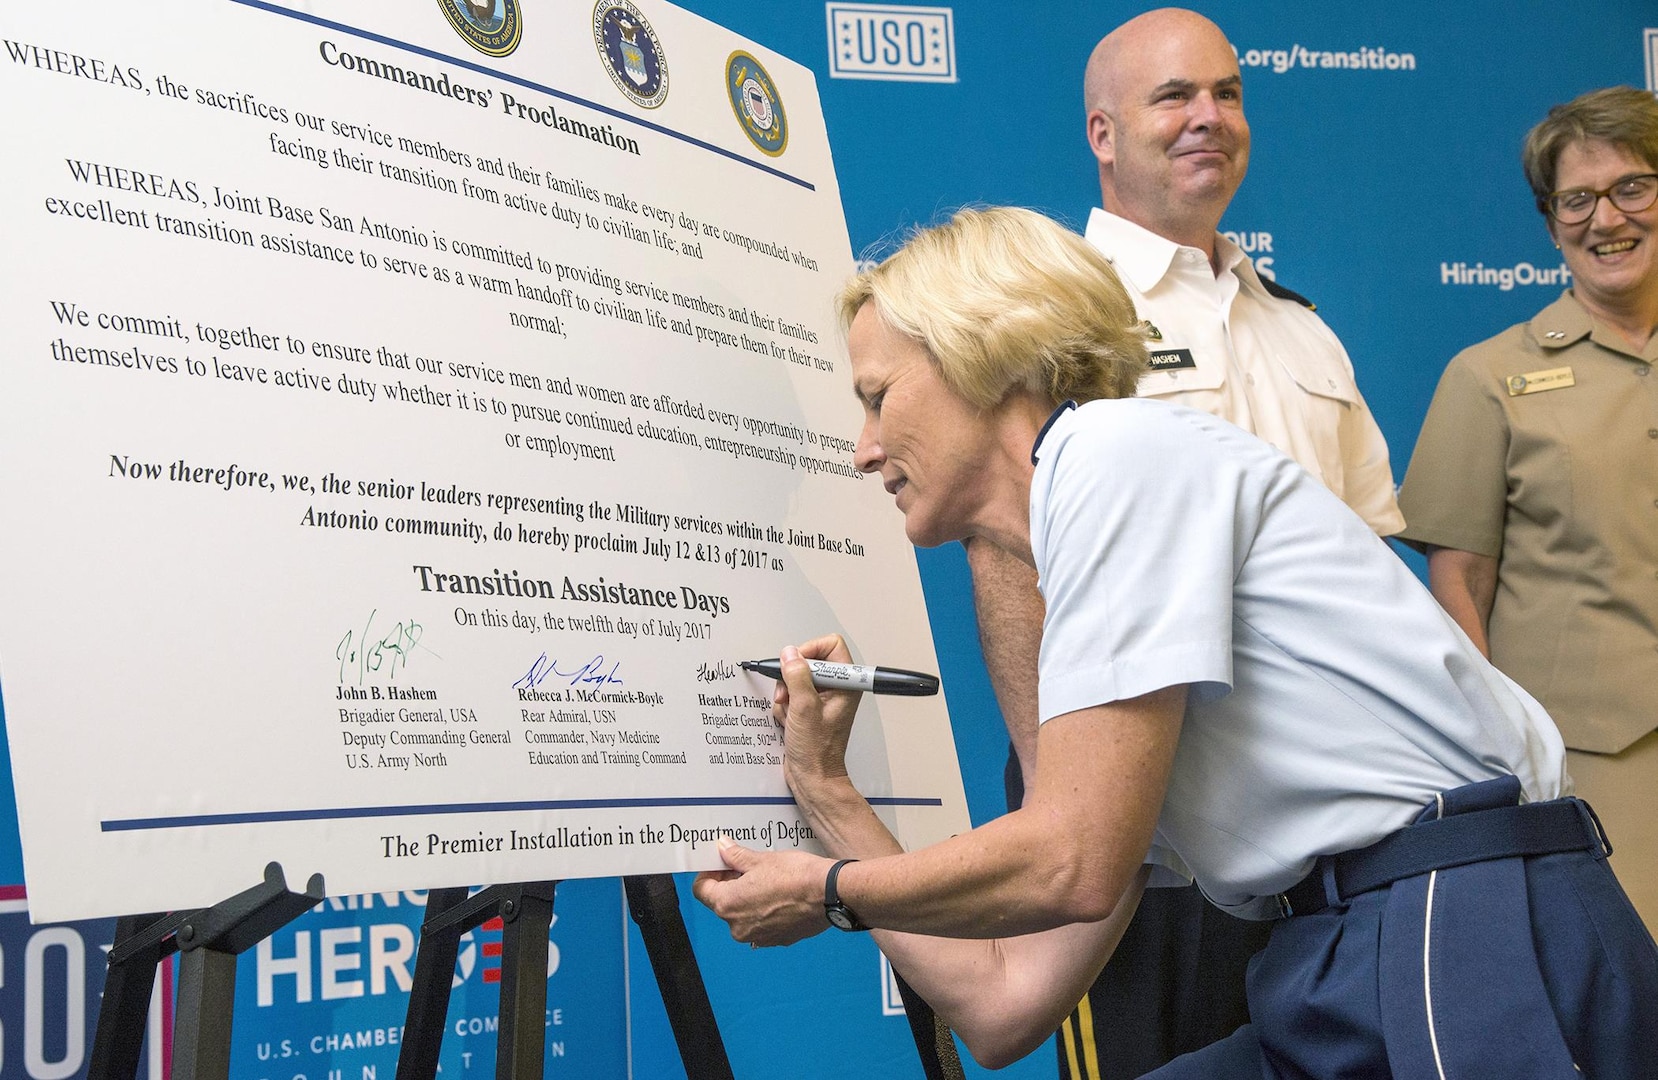 Brig. Gen. Heather Pringle (left), commander of the 502nd Air Base Wing and Joint Base San Antonio, signs the Commanders' Proclamation July 12 during the Transition Assistance Days at the Fort Sam Houston Community Center as Brig. Gen. John Hashem, deputy commanding general, U.S. Army North; and Rear Adm. Rebecca McCormick-Boyle, commander, Navy Medicine Education and Training Command, look on.